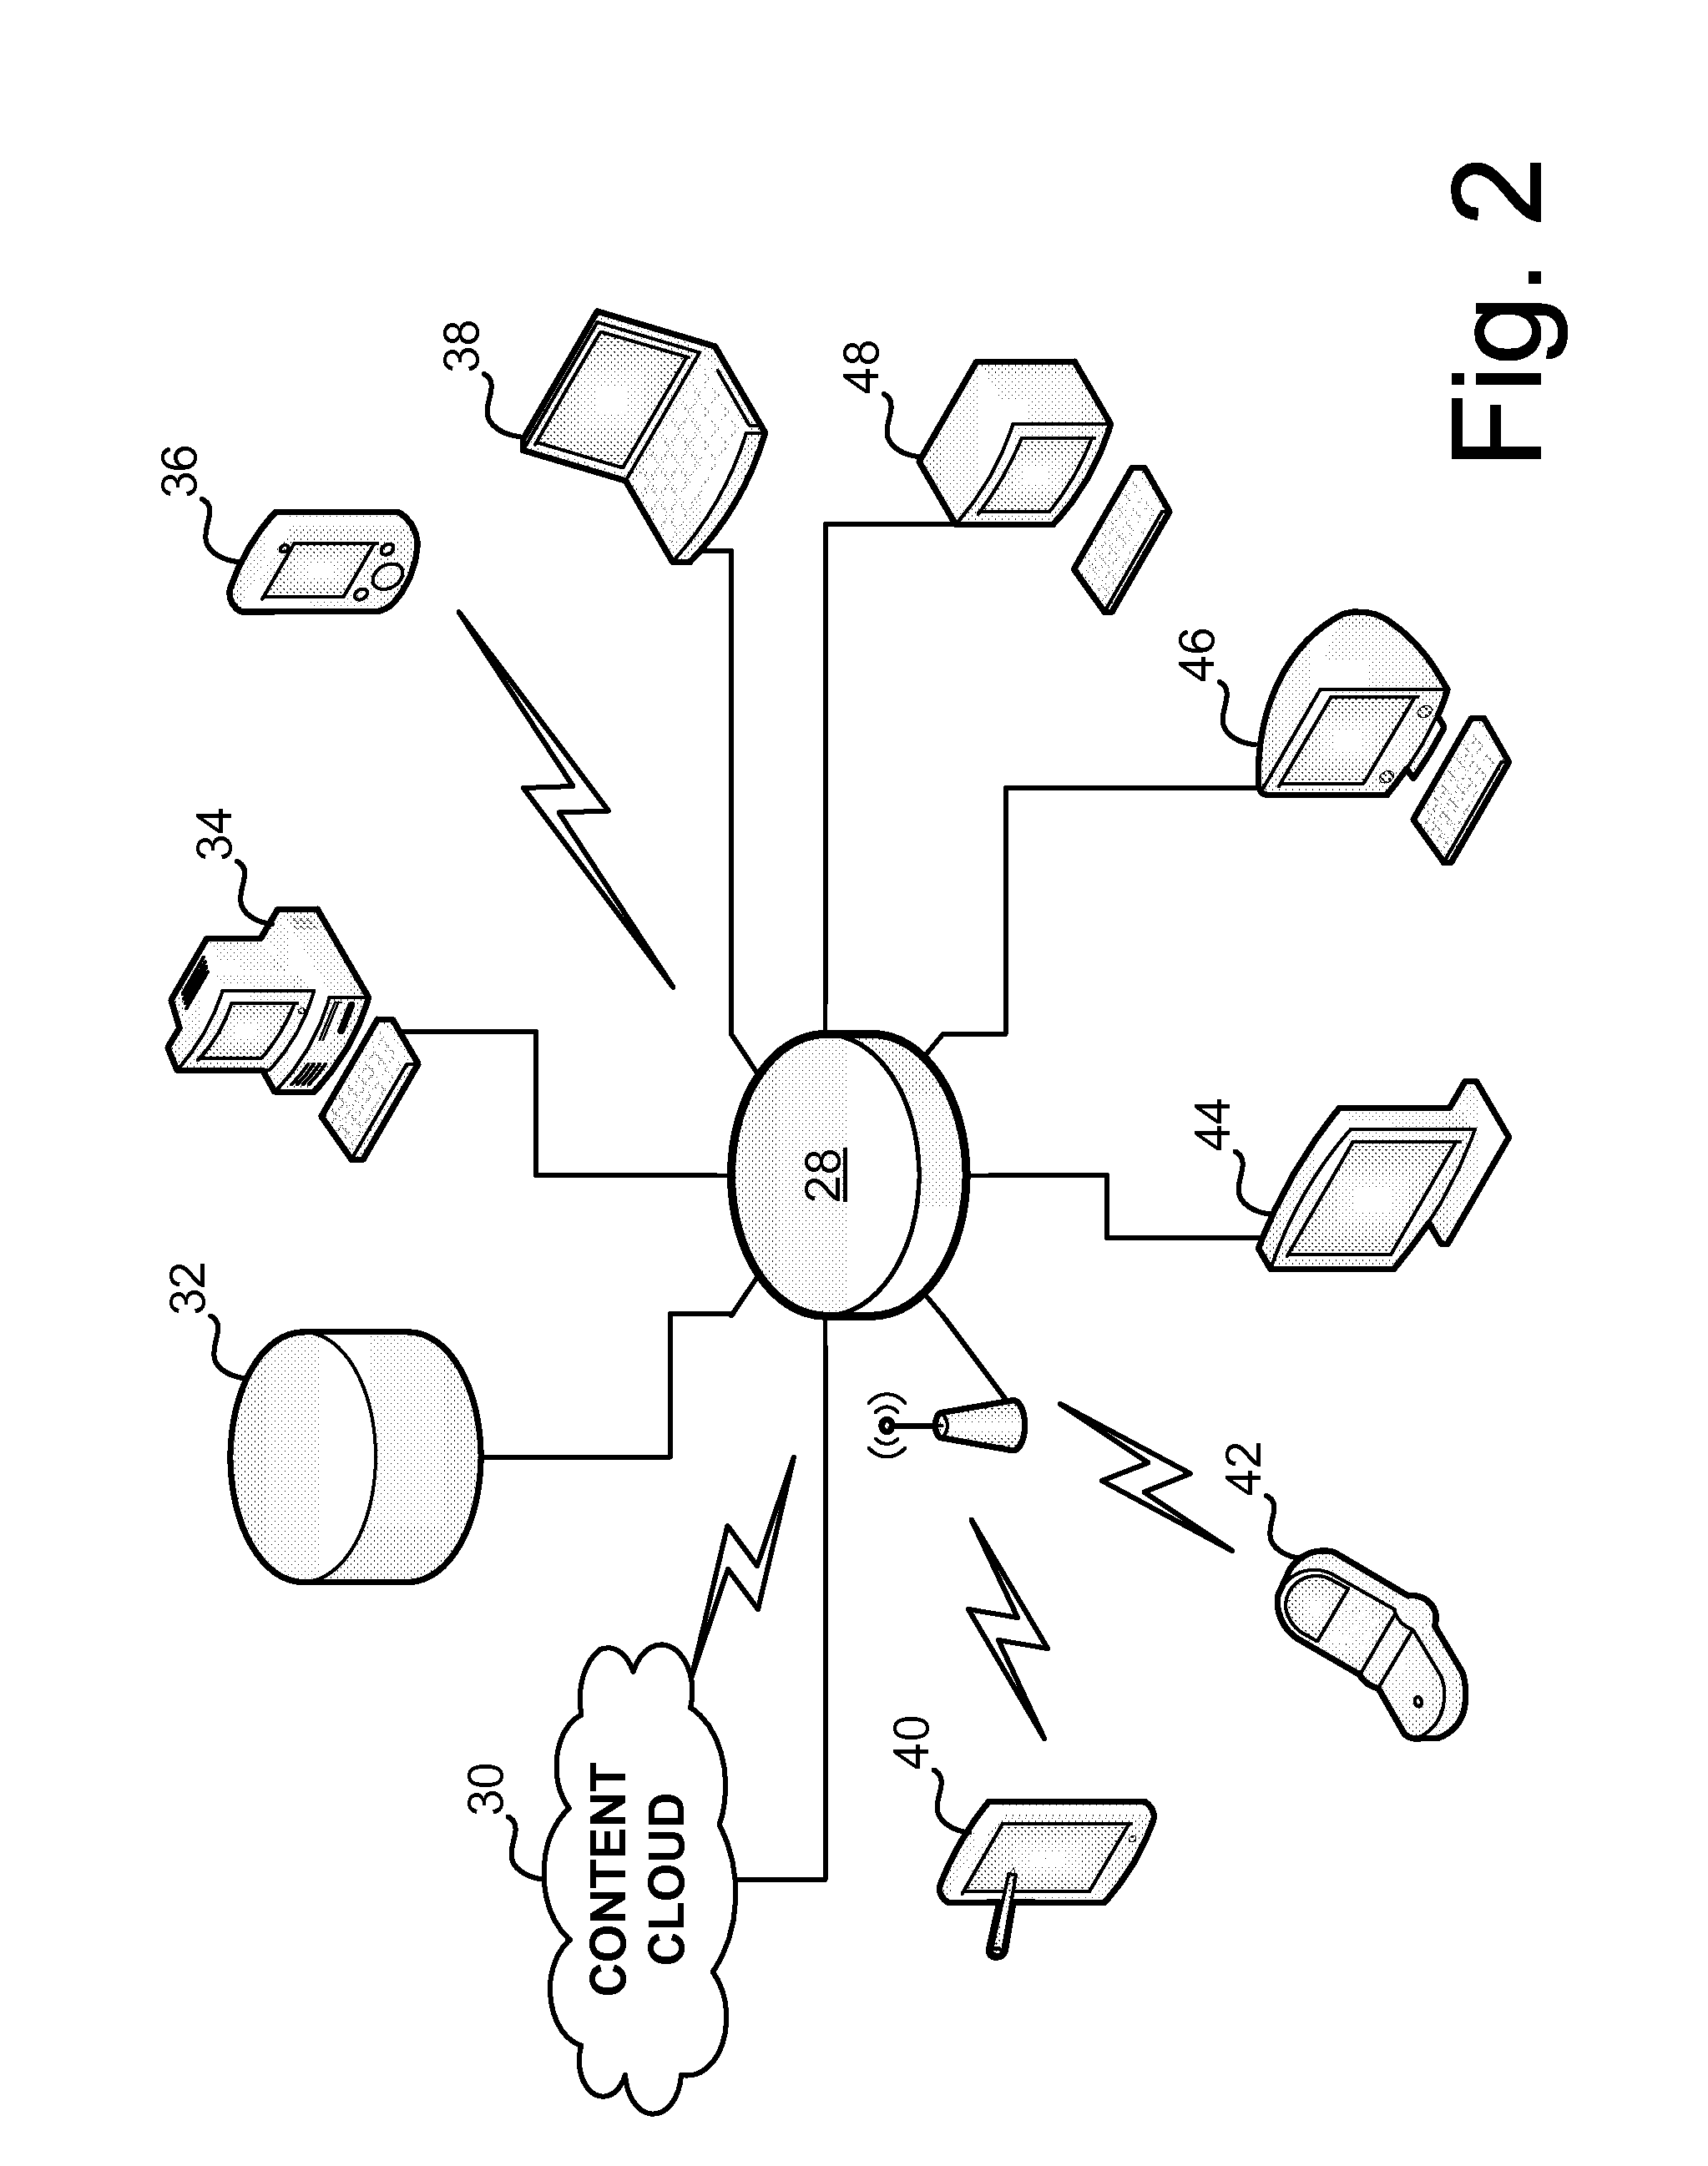 Method for building a search algorithm and method for linking documents with an object